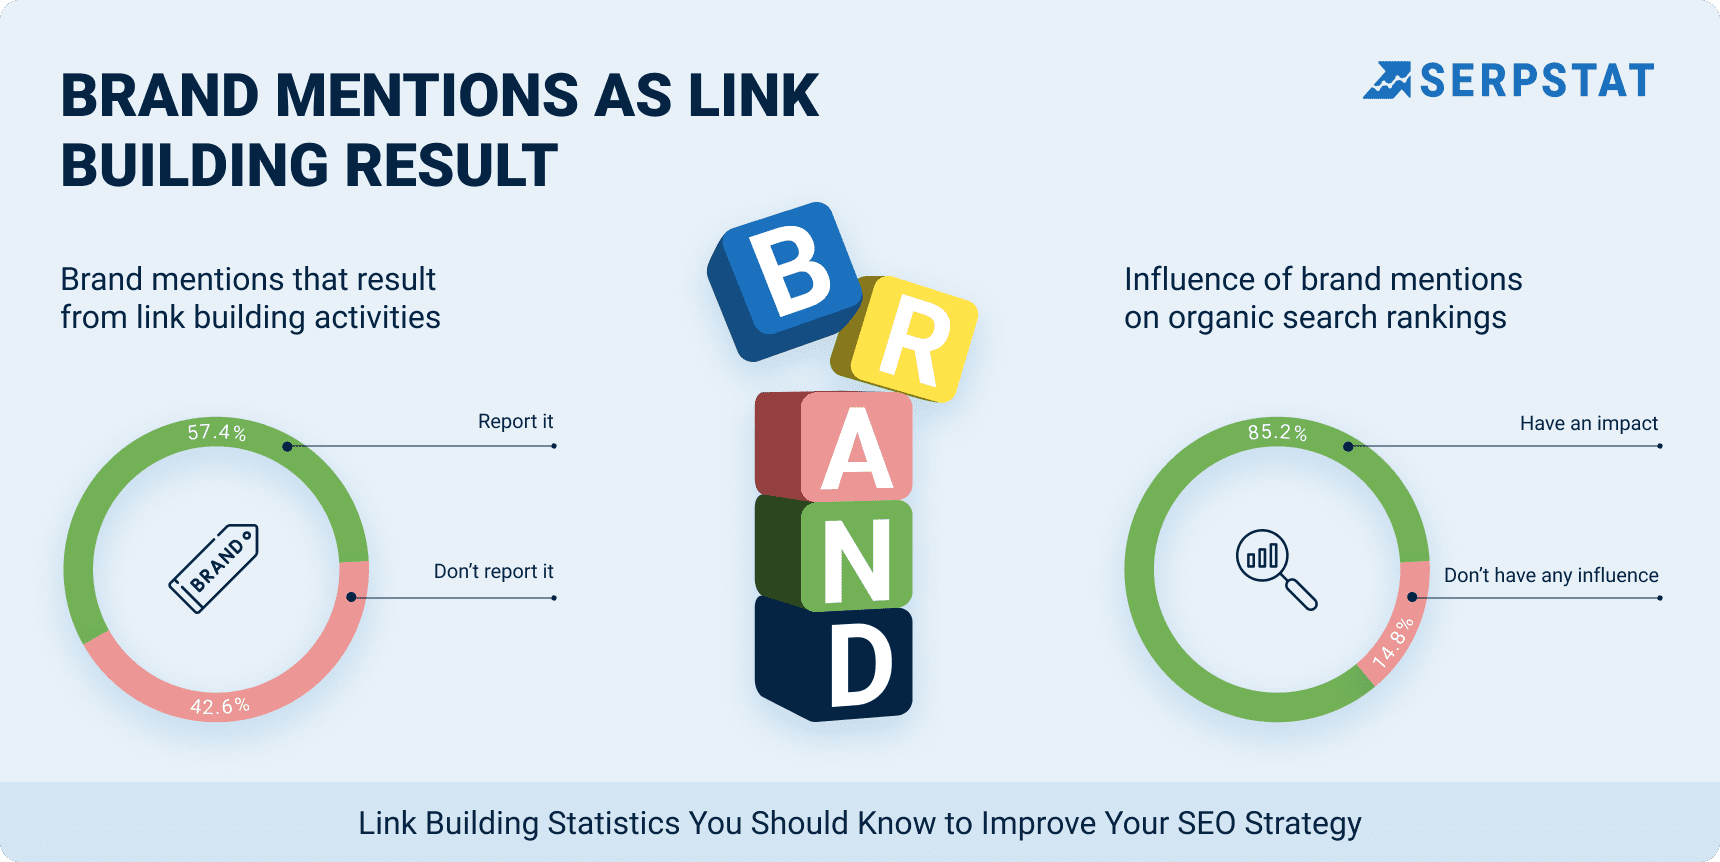 Brand mentions as link building result